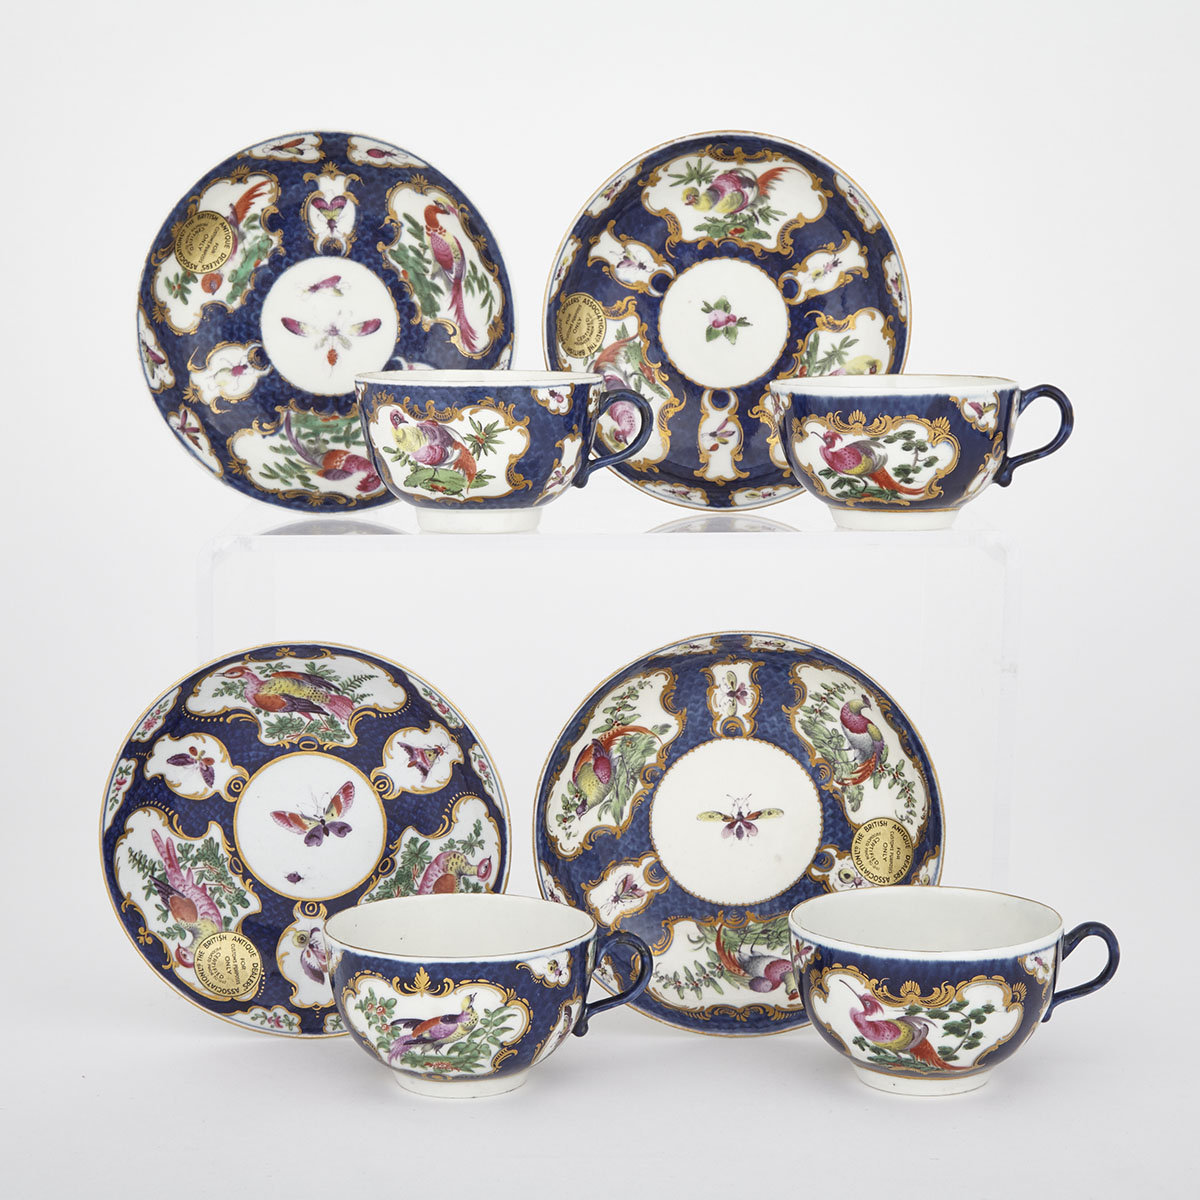 Four Worcester Blue Scale Ground Tea Cups and Saucers, c.1770